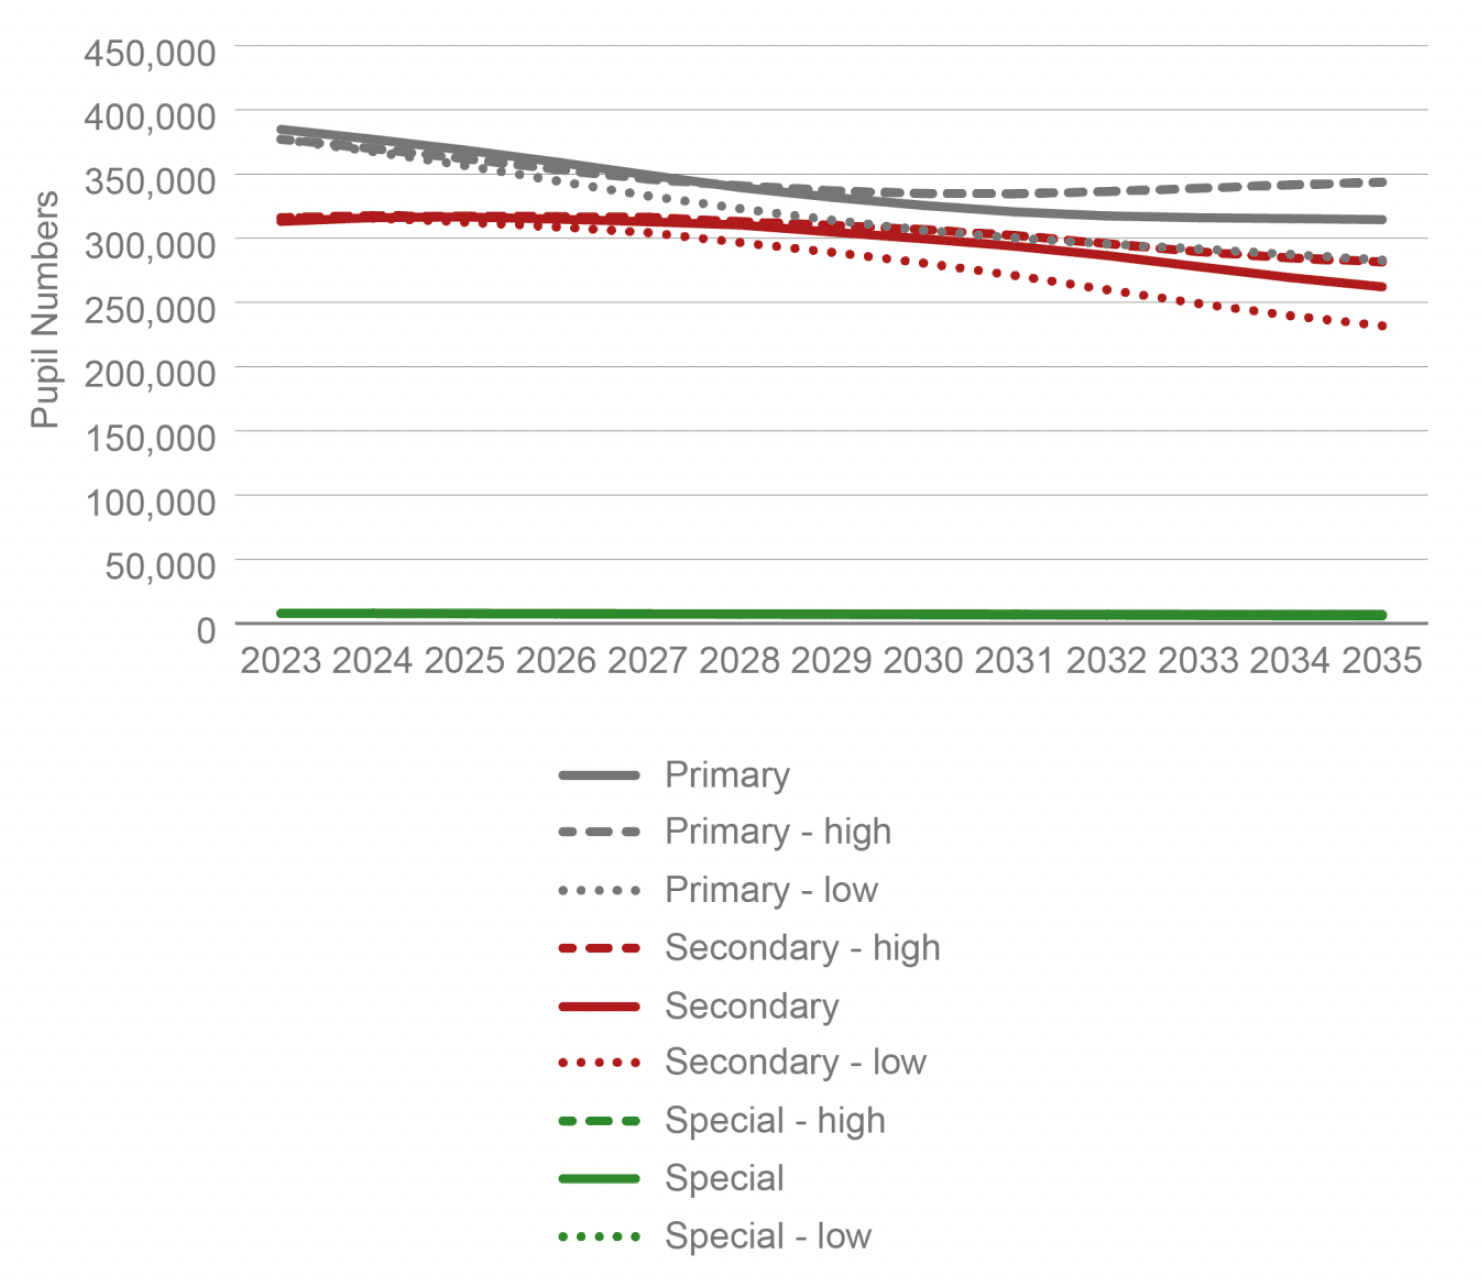 Longer-term line chart generally showing the reduction in the school-aged population to 2035, across all school types. Adjustments for high and low scenarios around central projections are displayed, fanning out as the projections move further into the future.